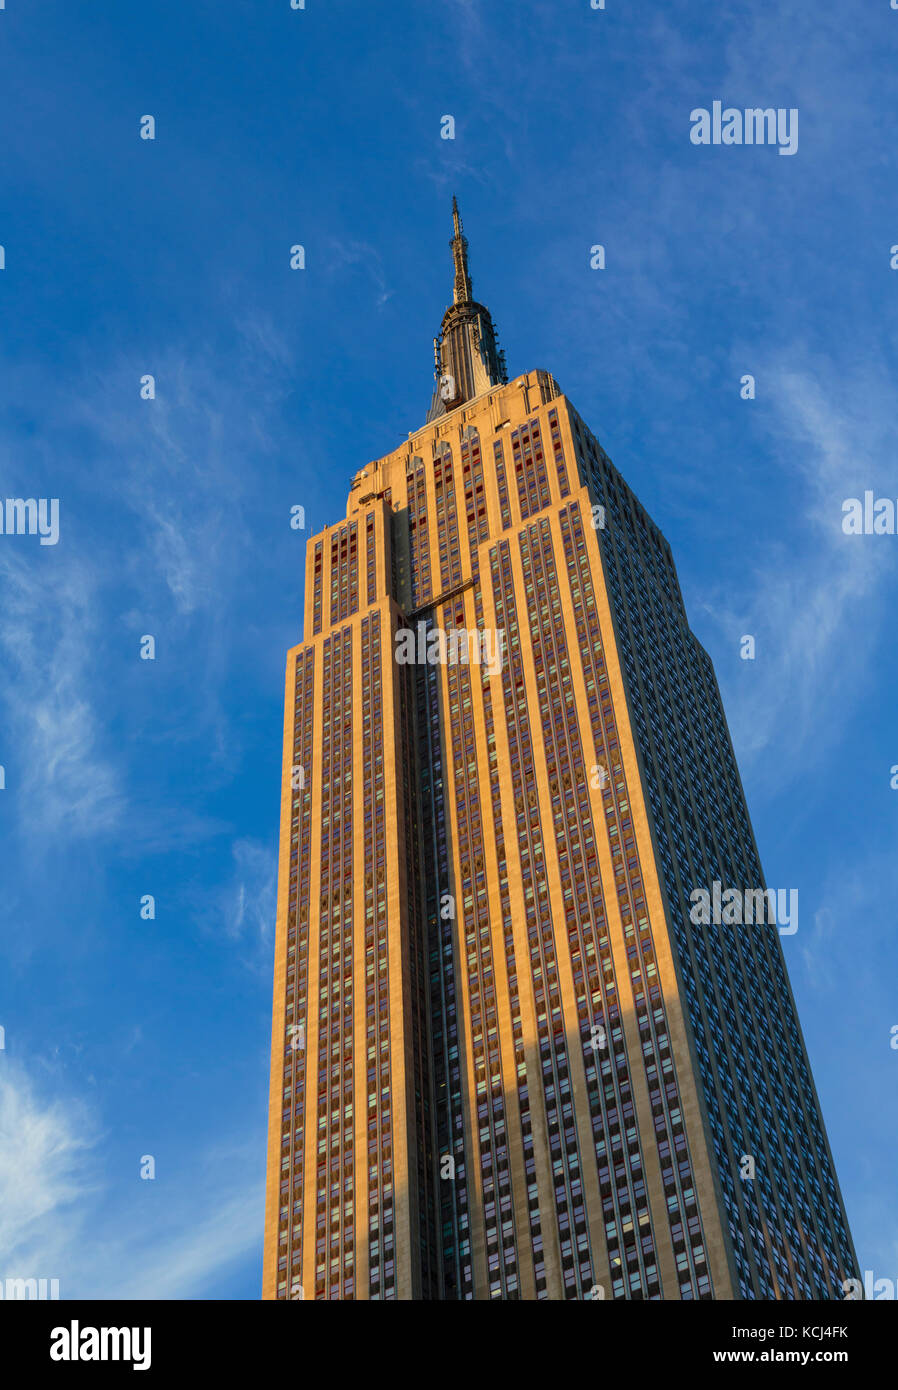 New York City, New York State, United States of America.  The Empire State Building skyscraper. Stock Photo